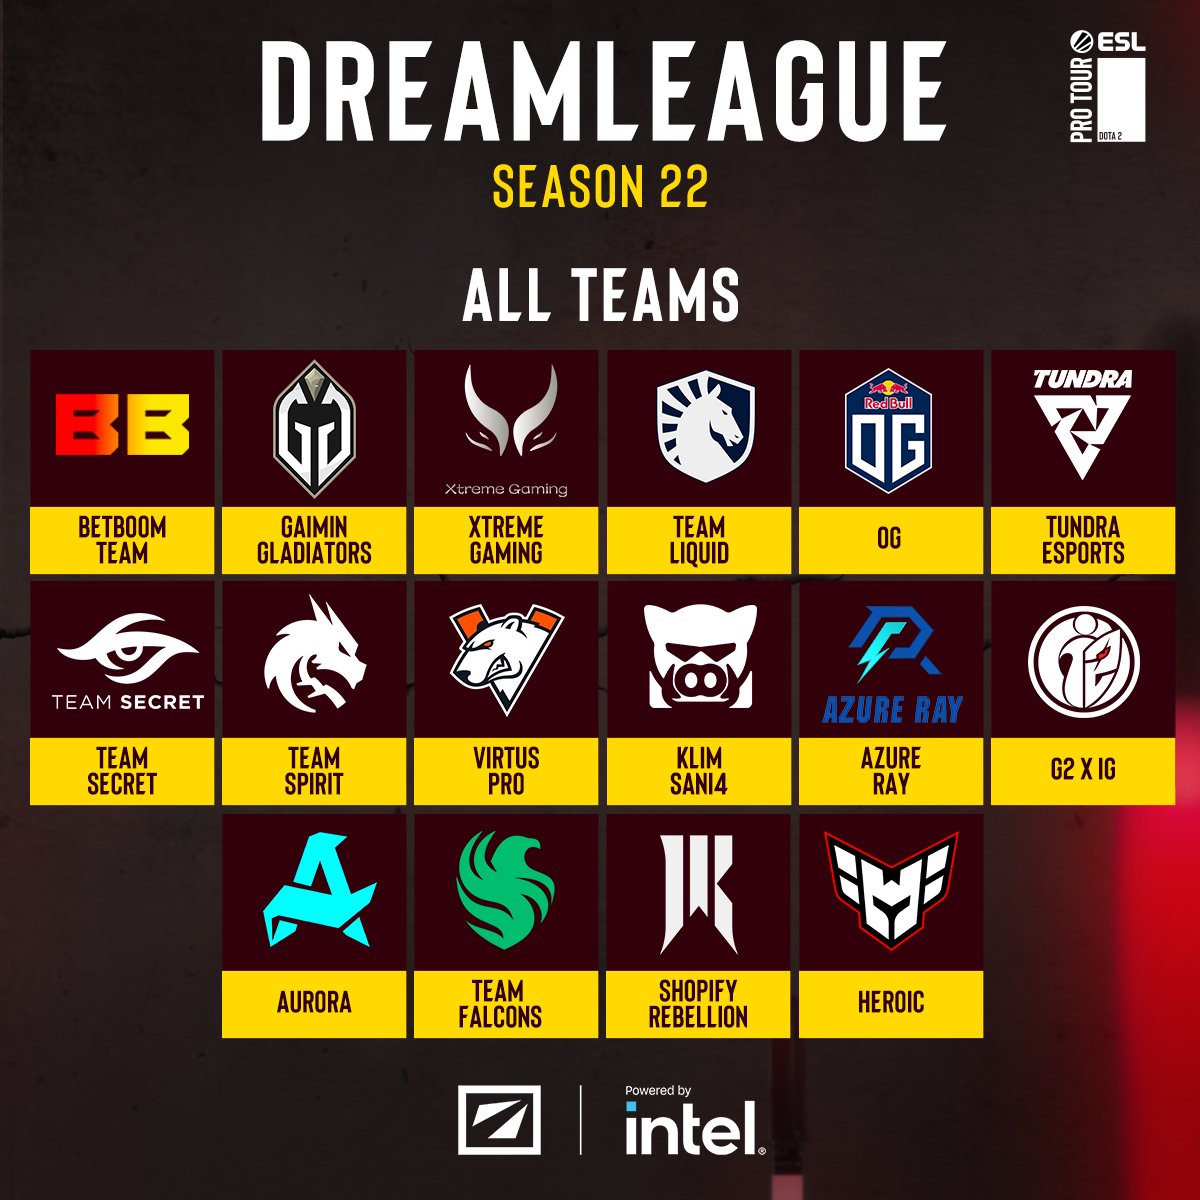 HERE ARE YOUR 16 TEAMS FOR DREAMLEAGUE SEASON 22!

This is gonna be good 🔥 #ESLProTour